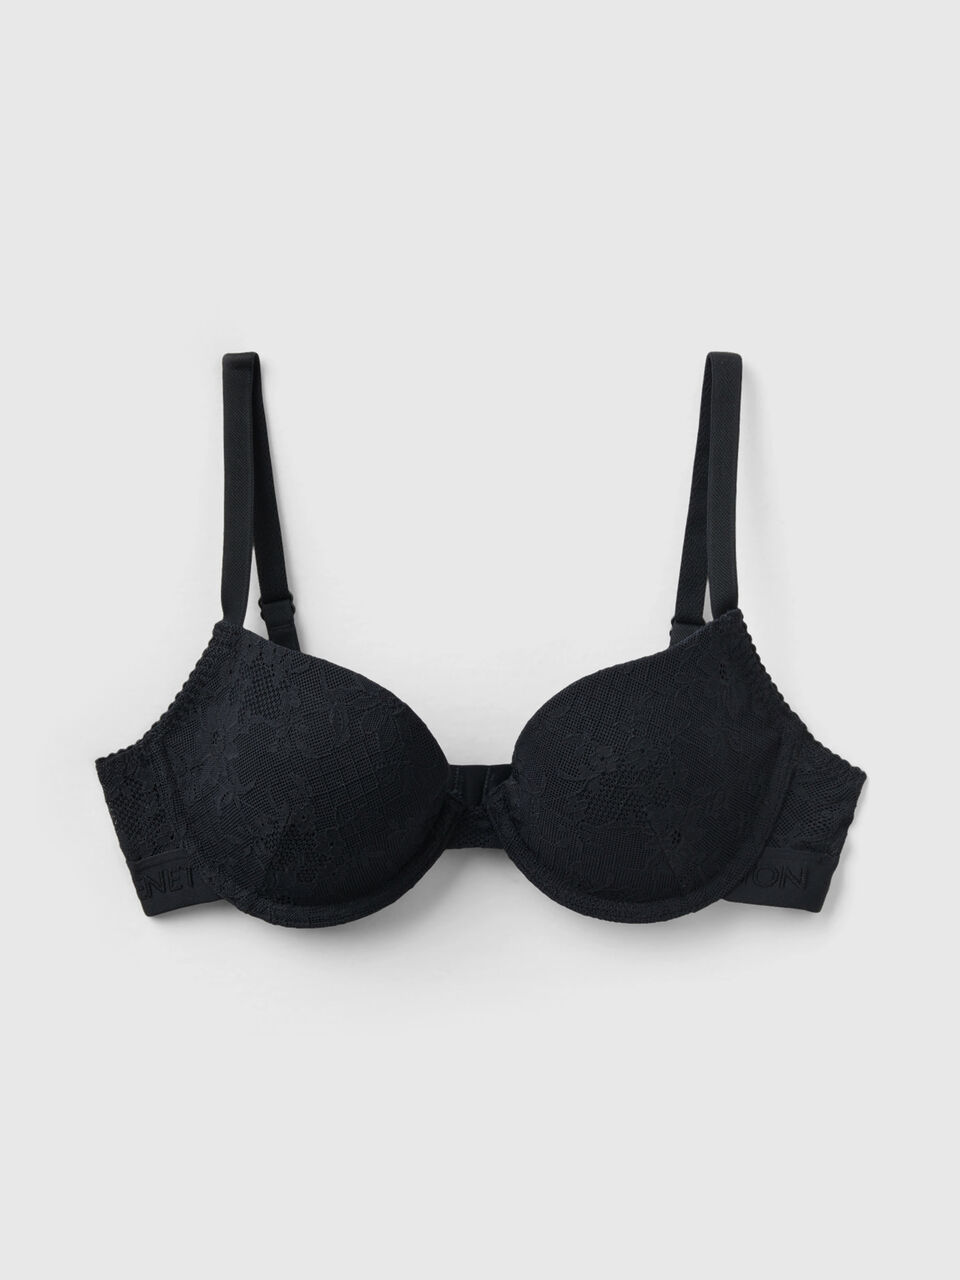 Buy Deep V Young Girl Push up Lace Bralette Breathable Summer Black Big Bra  Tops Plus Size 46 44 42 40 38 36 B C D Cup Bra C306 Black Cup Size D Bands  Size 42 at